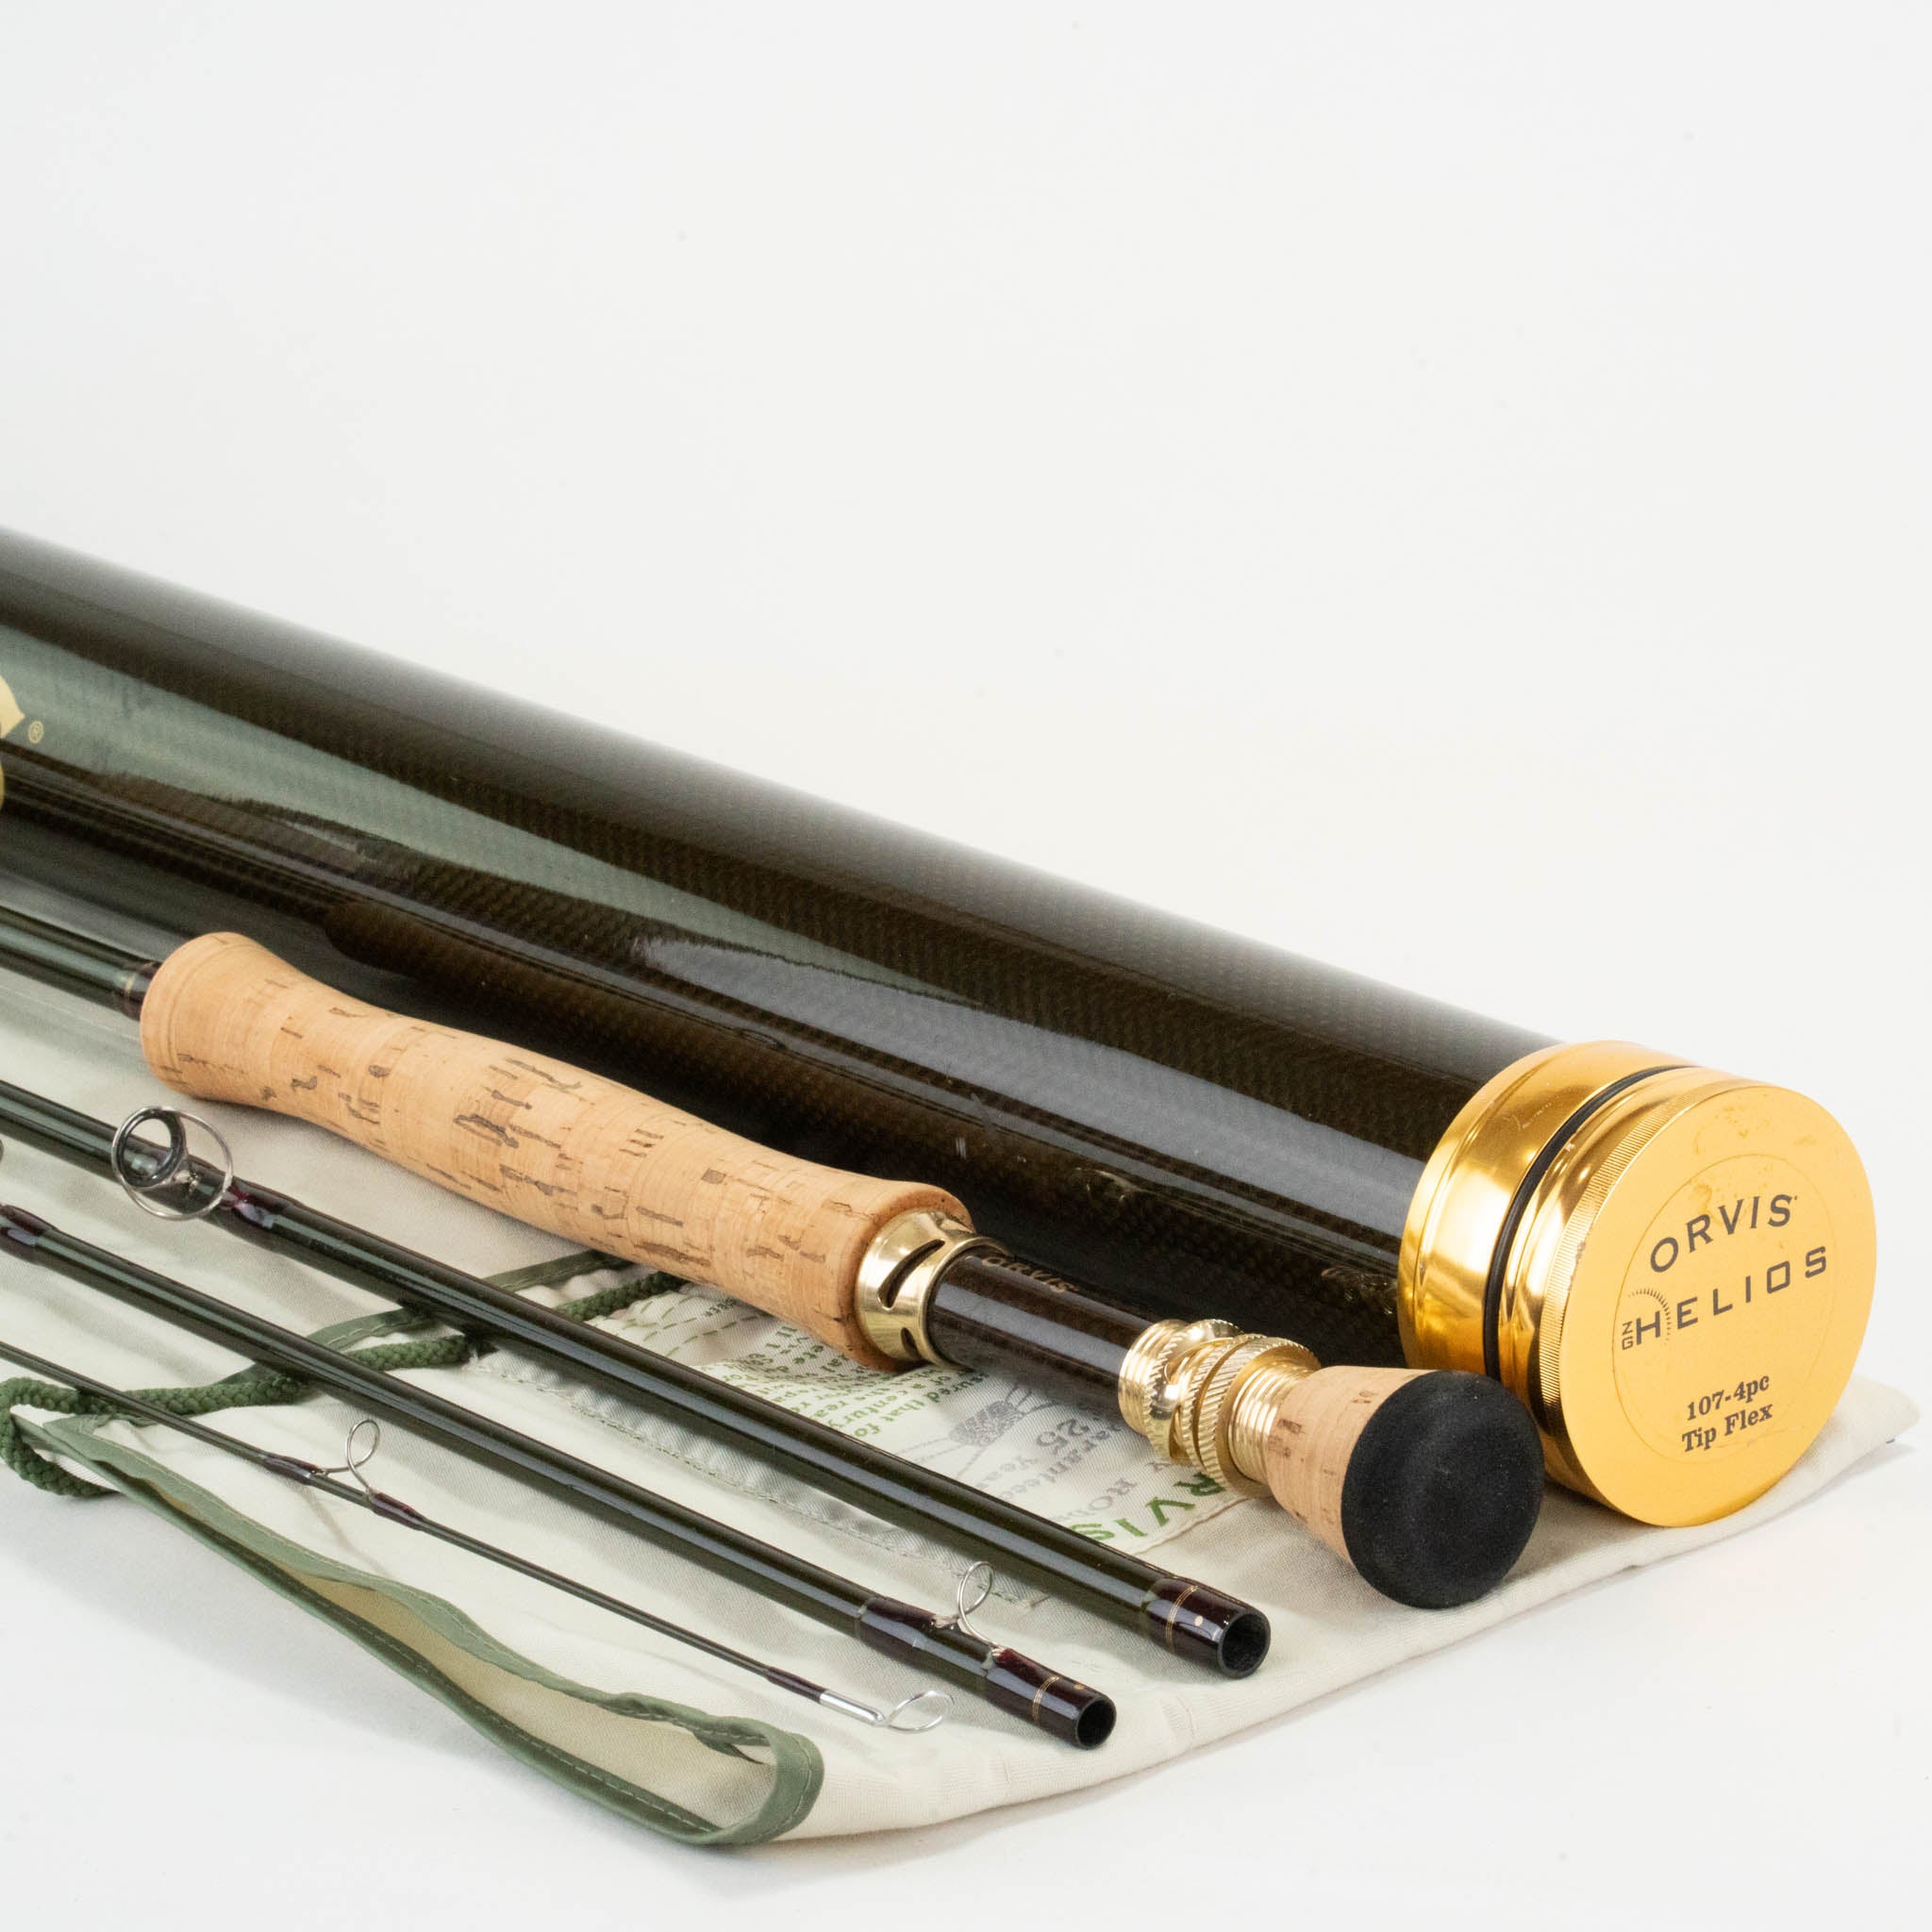 Orvis Helios ZG 7100-4 Fly Rod - 7wt 10ft 0in 4pc – Outfishers